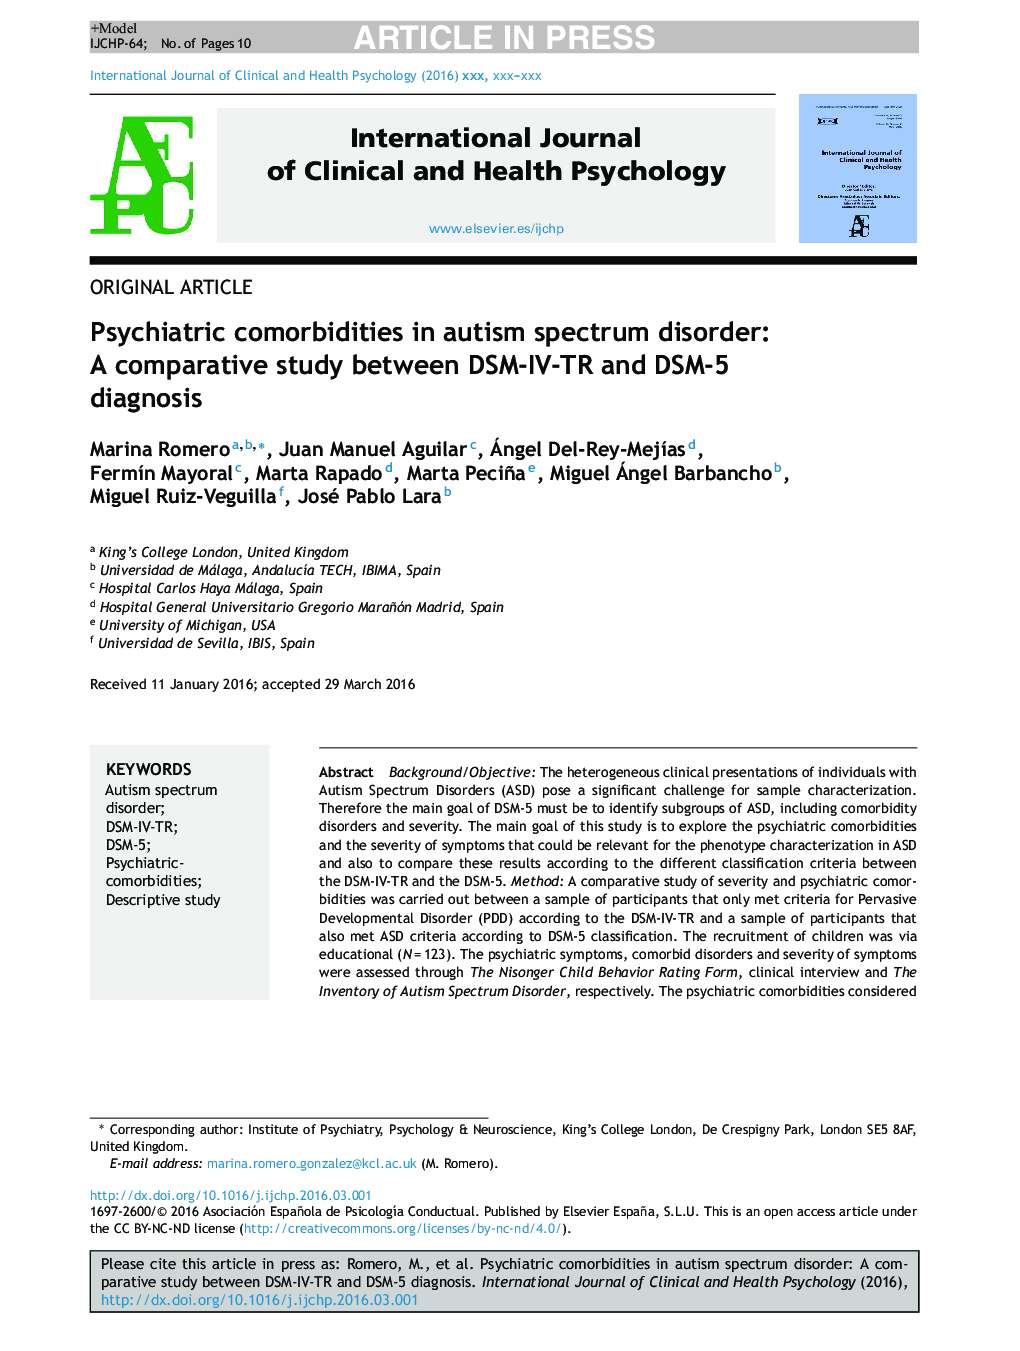 Psychiatric comorbidities in autism spectrum disorder: A comparative study between DSM-IV-TR and DSM-5 diagnosis